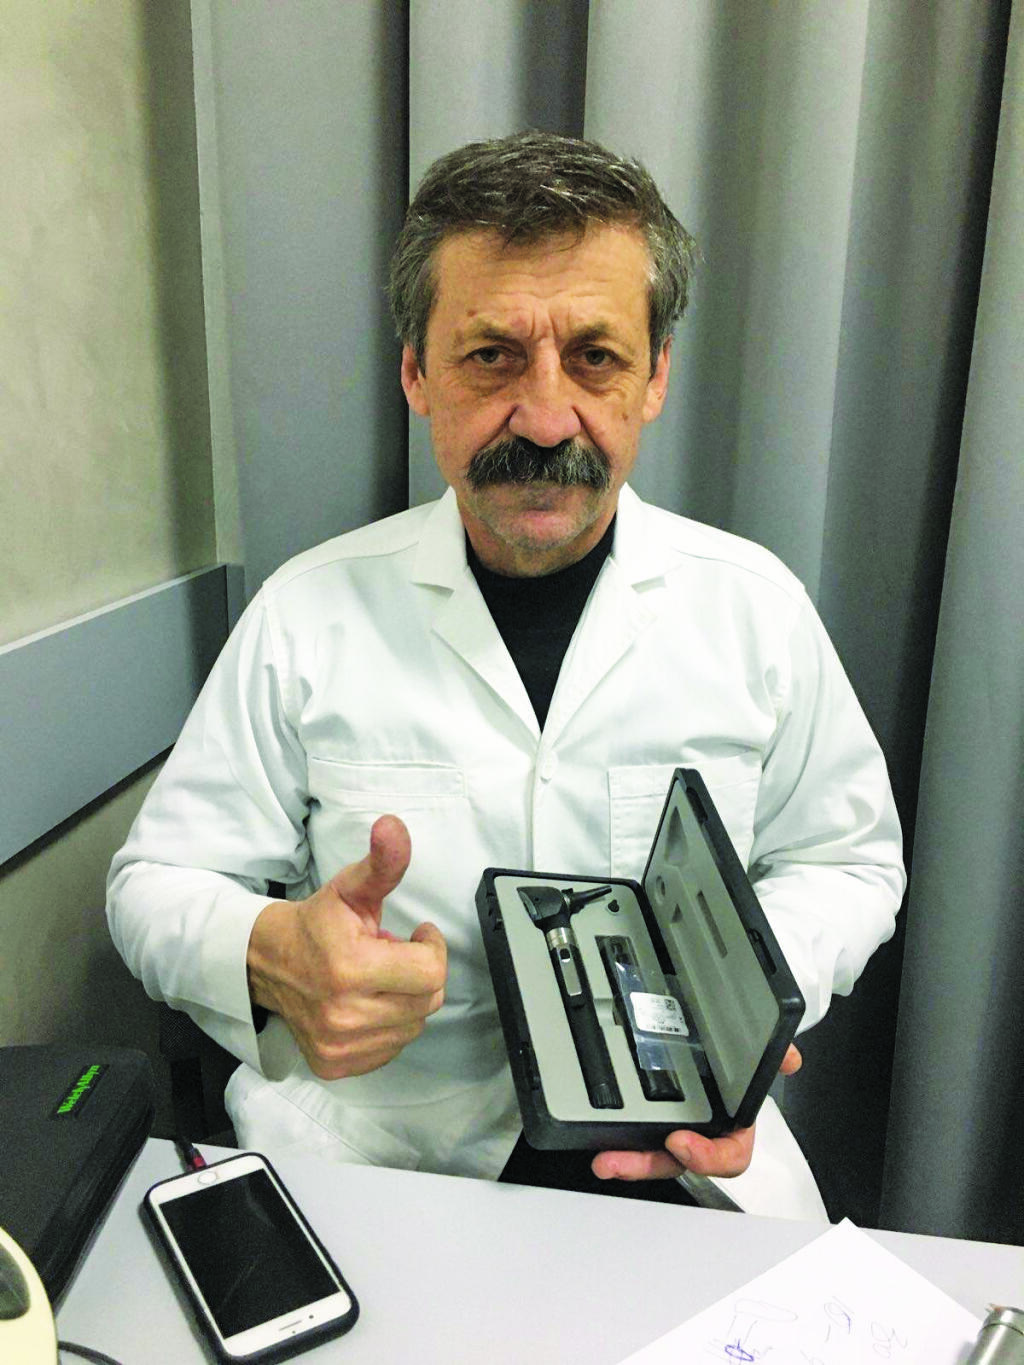 This Ukrainian ear, nose and throat doctor gives a "thumb's up" after receiving an otoscope kit via a donation coordinated by Santa Rosa audiologist Peter Marincovich and Exchange Bank trust officer Andriy Lsyshyn. The scopes help diagnose hearing loss among patients due to loud noise from bursting shells during the war. (Courtesy: Peter Marincovich and Andriy Lesyshyn)